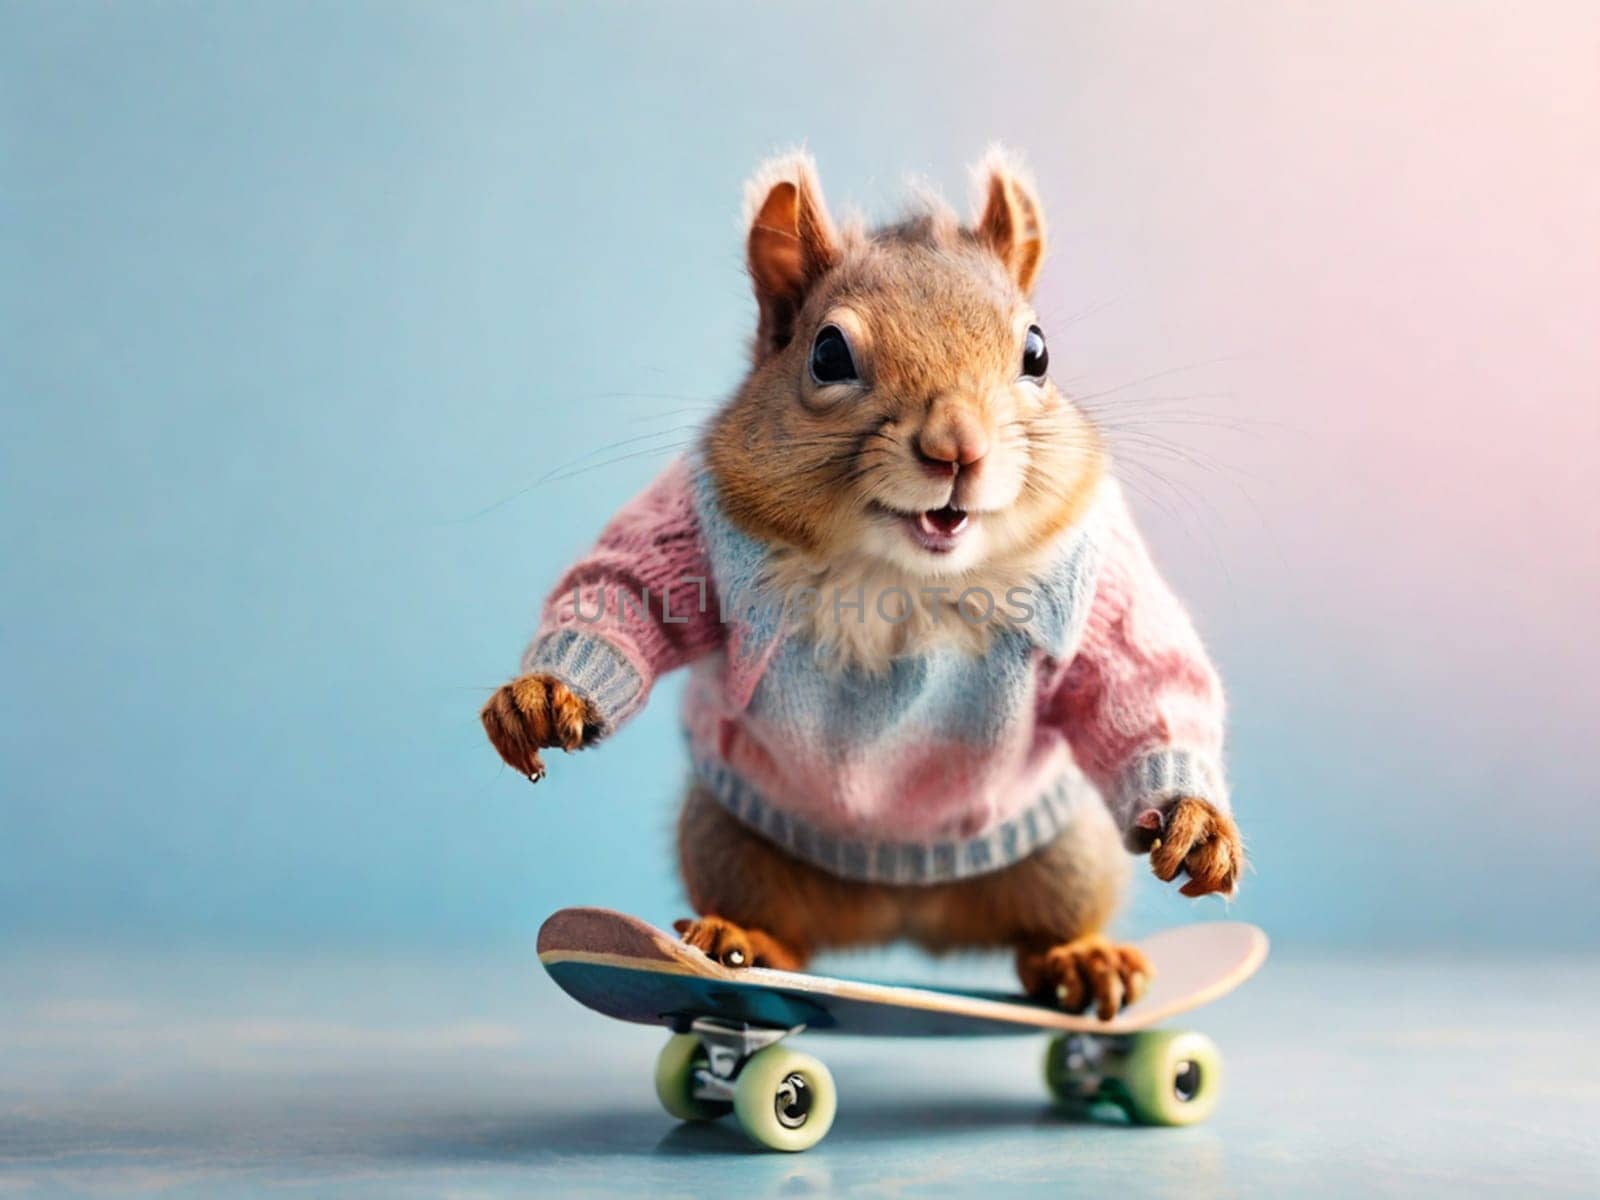 A funny squirrel in a sweater flies on a skateboard